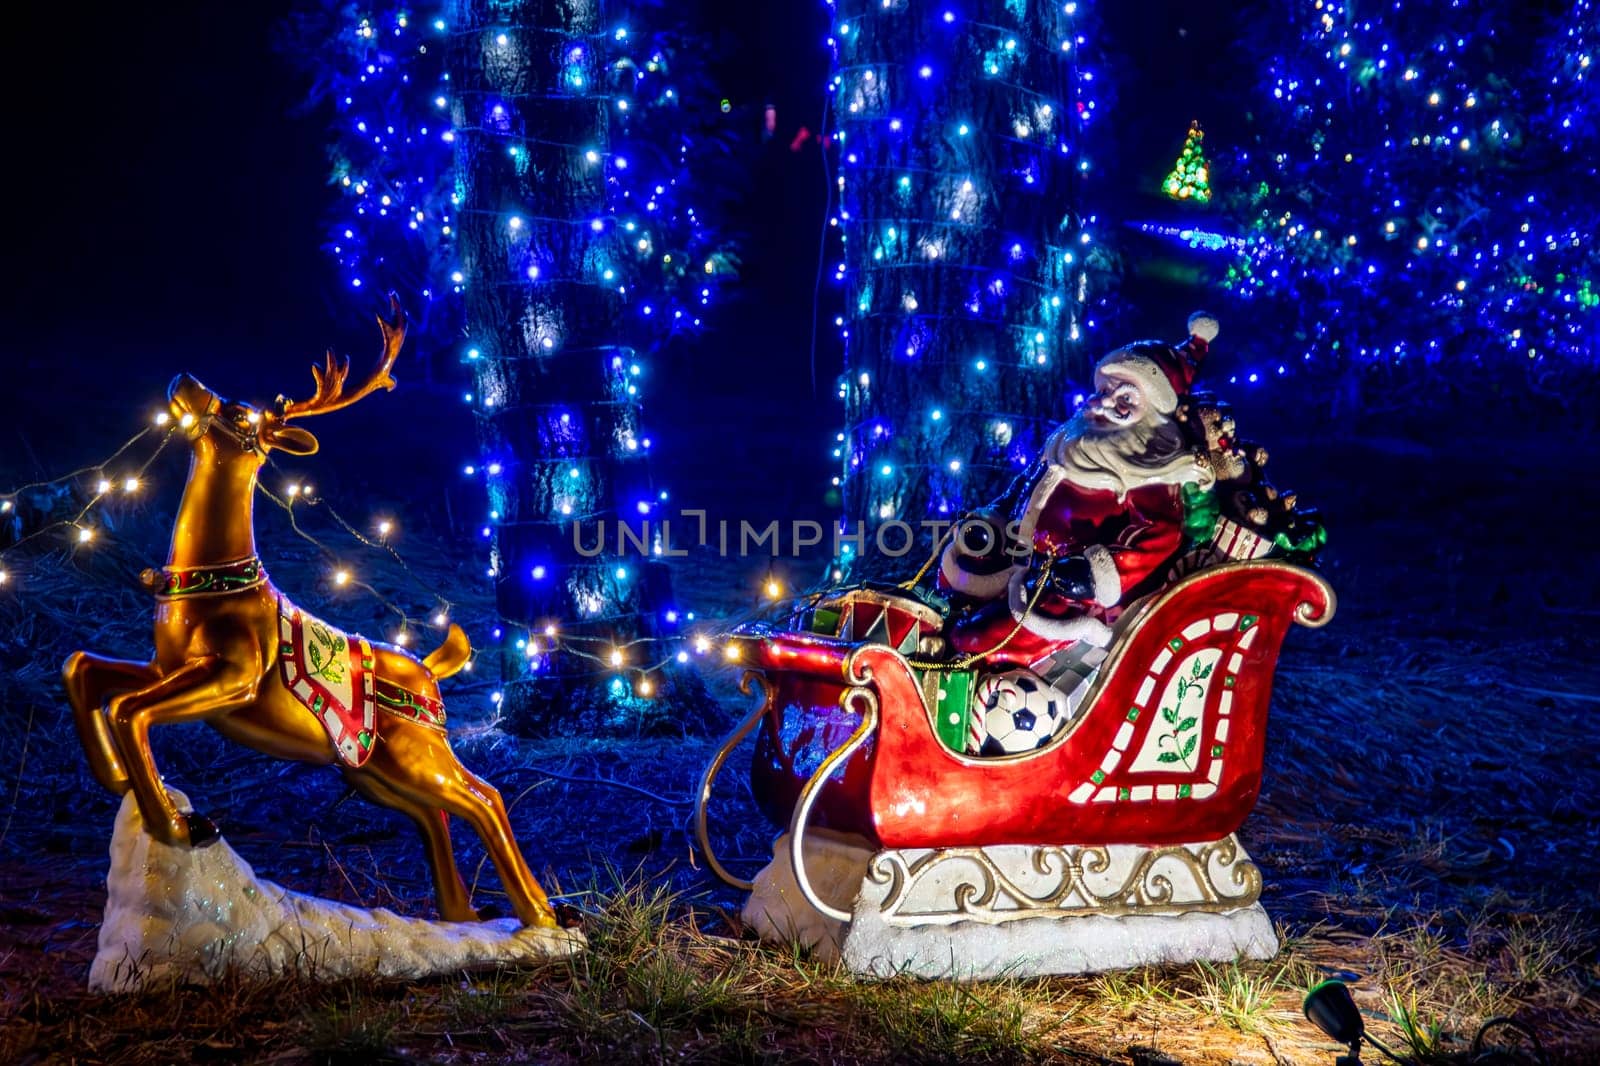 Colorful Nighttime Holiday Display Featuring A Lit Reindeer And Santa Claus In A Sleigh Decoration, Surrounded By Blue-Lit Trees And Festive Ornaments.